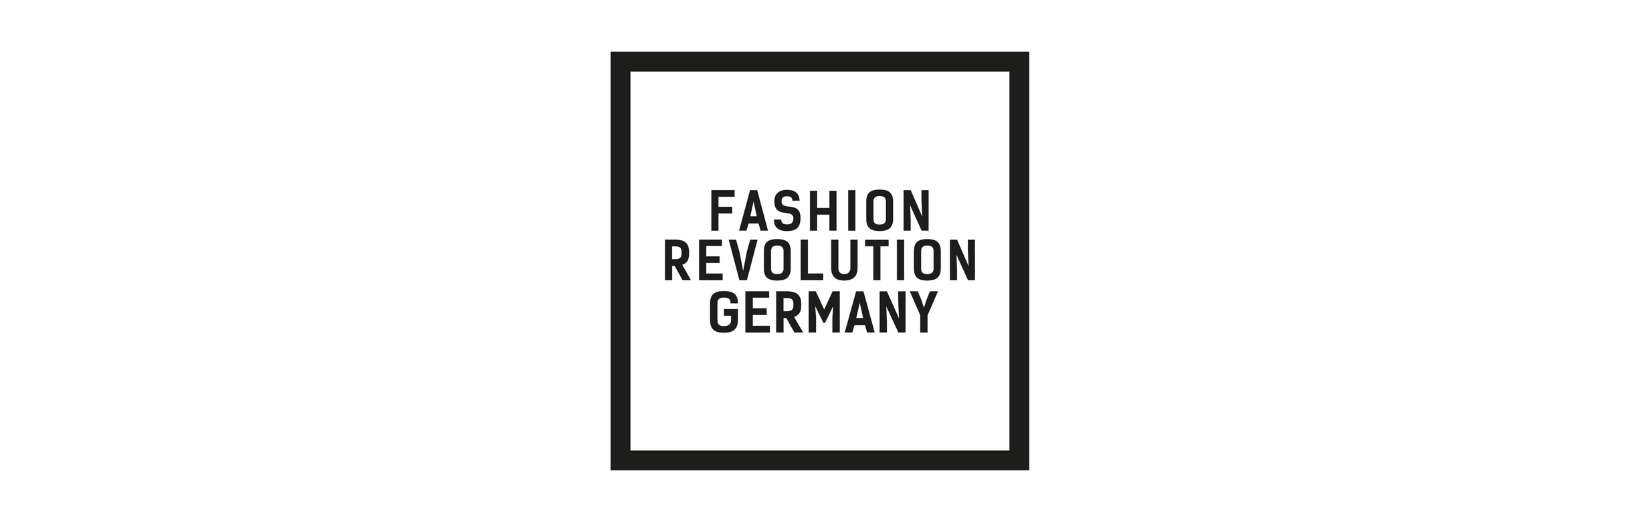 Fashion Revolution Germany  Department of Economic and Social Affairs